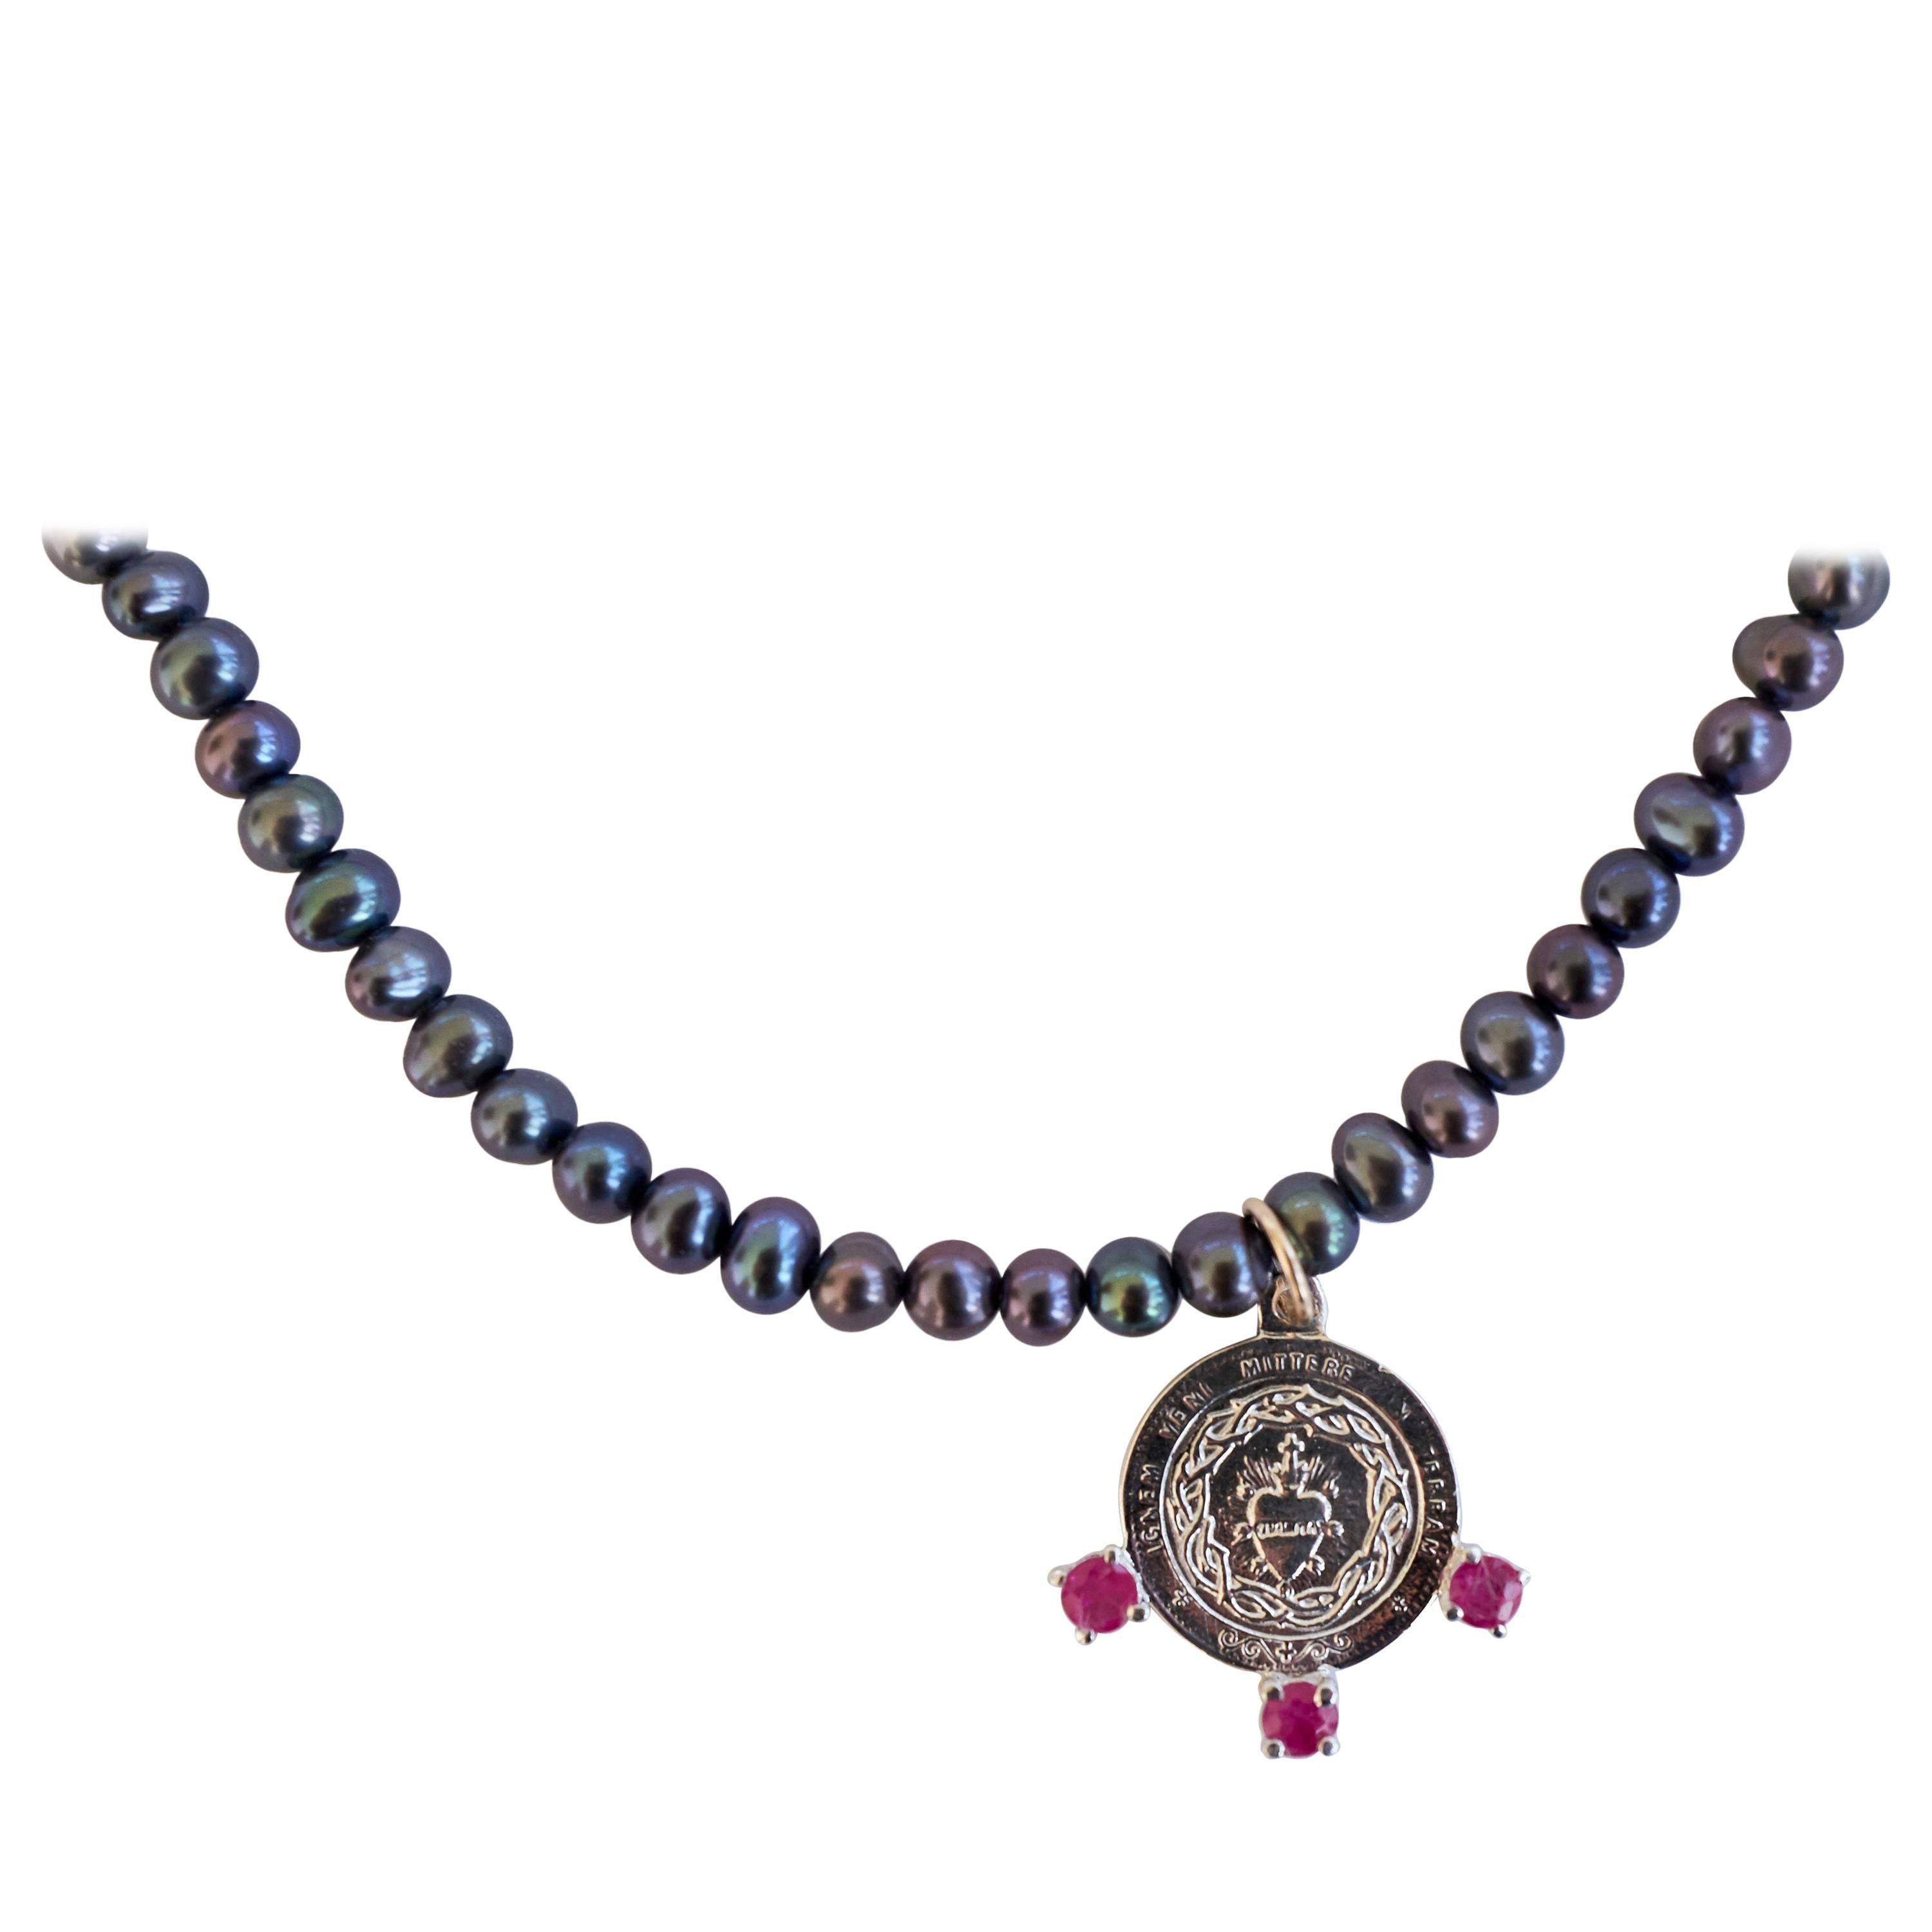 Black Pearl Chain Necklace Medal Sacred Heart Pink Tourmaline 16